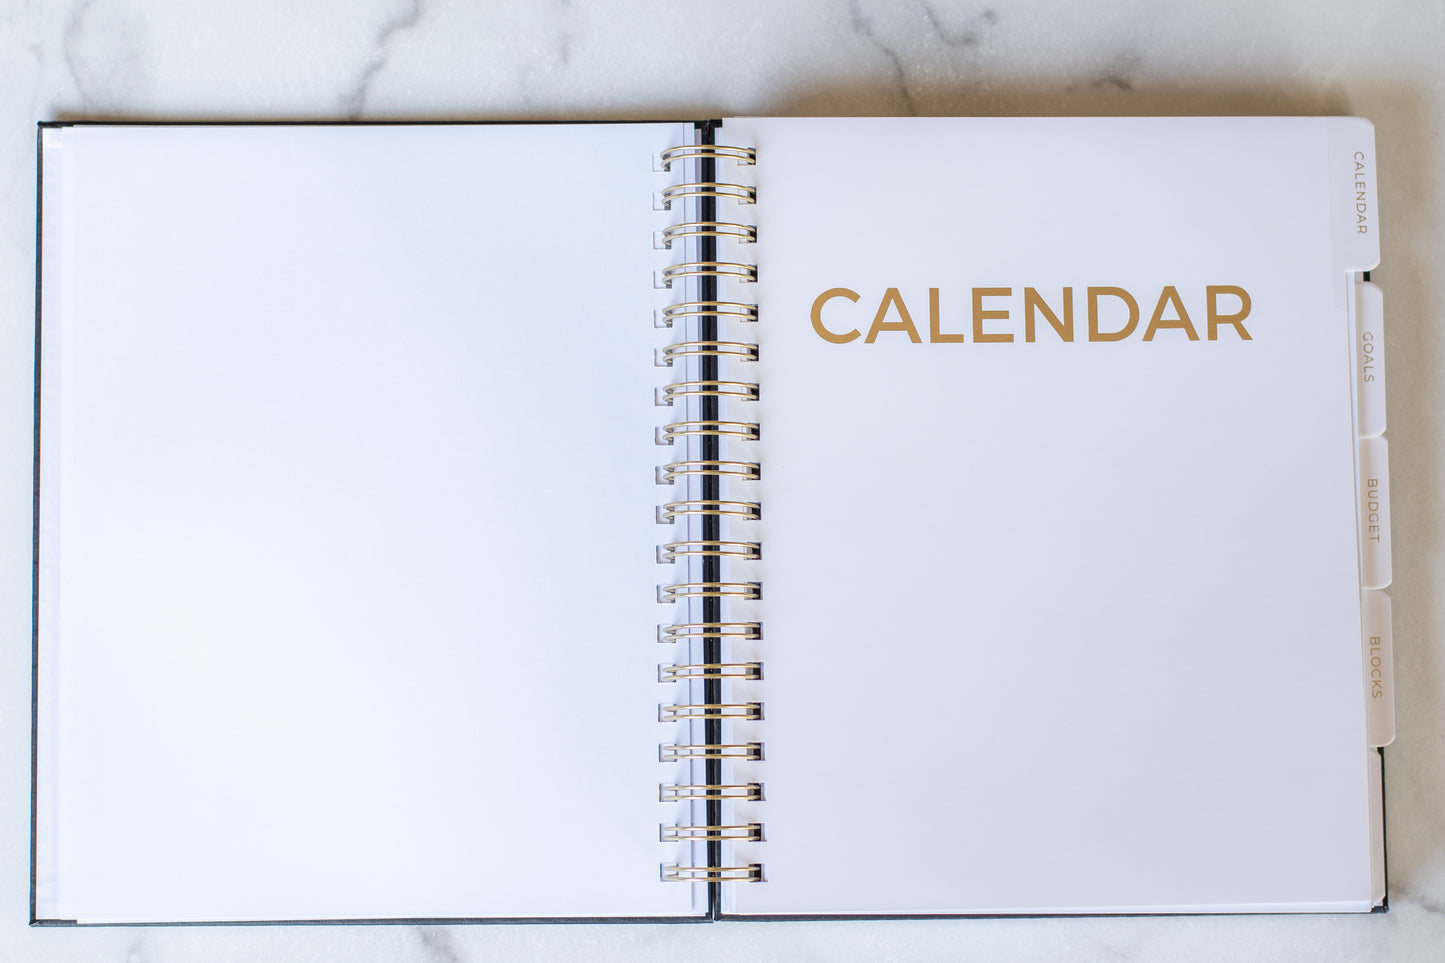 Block Schedule™ Planner | Leather Cover (weekly version)